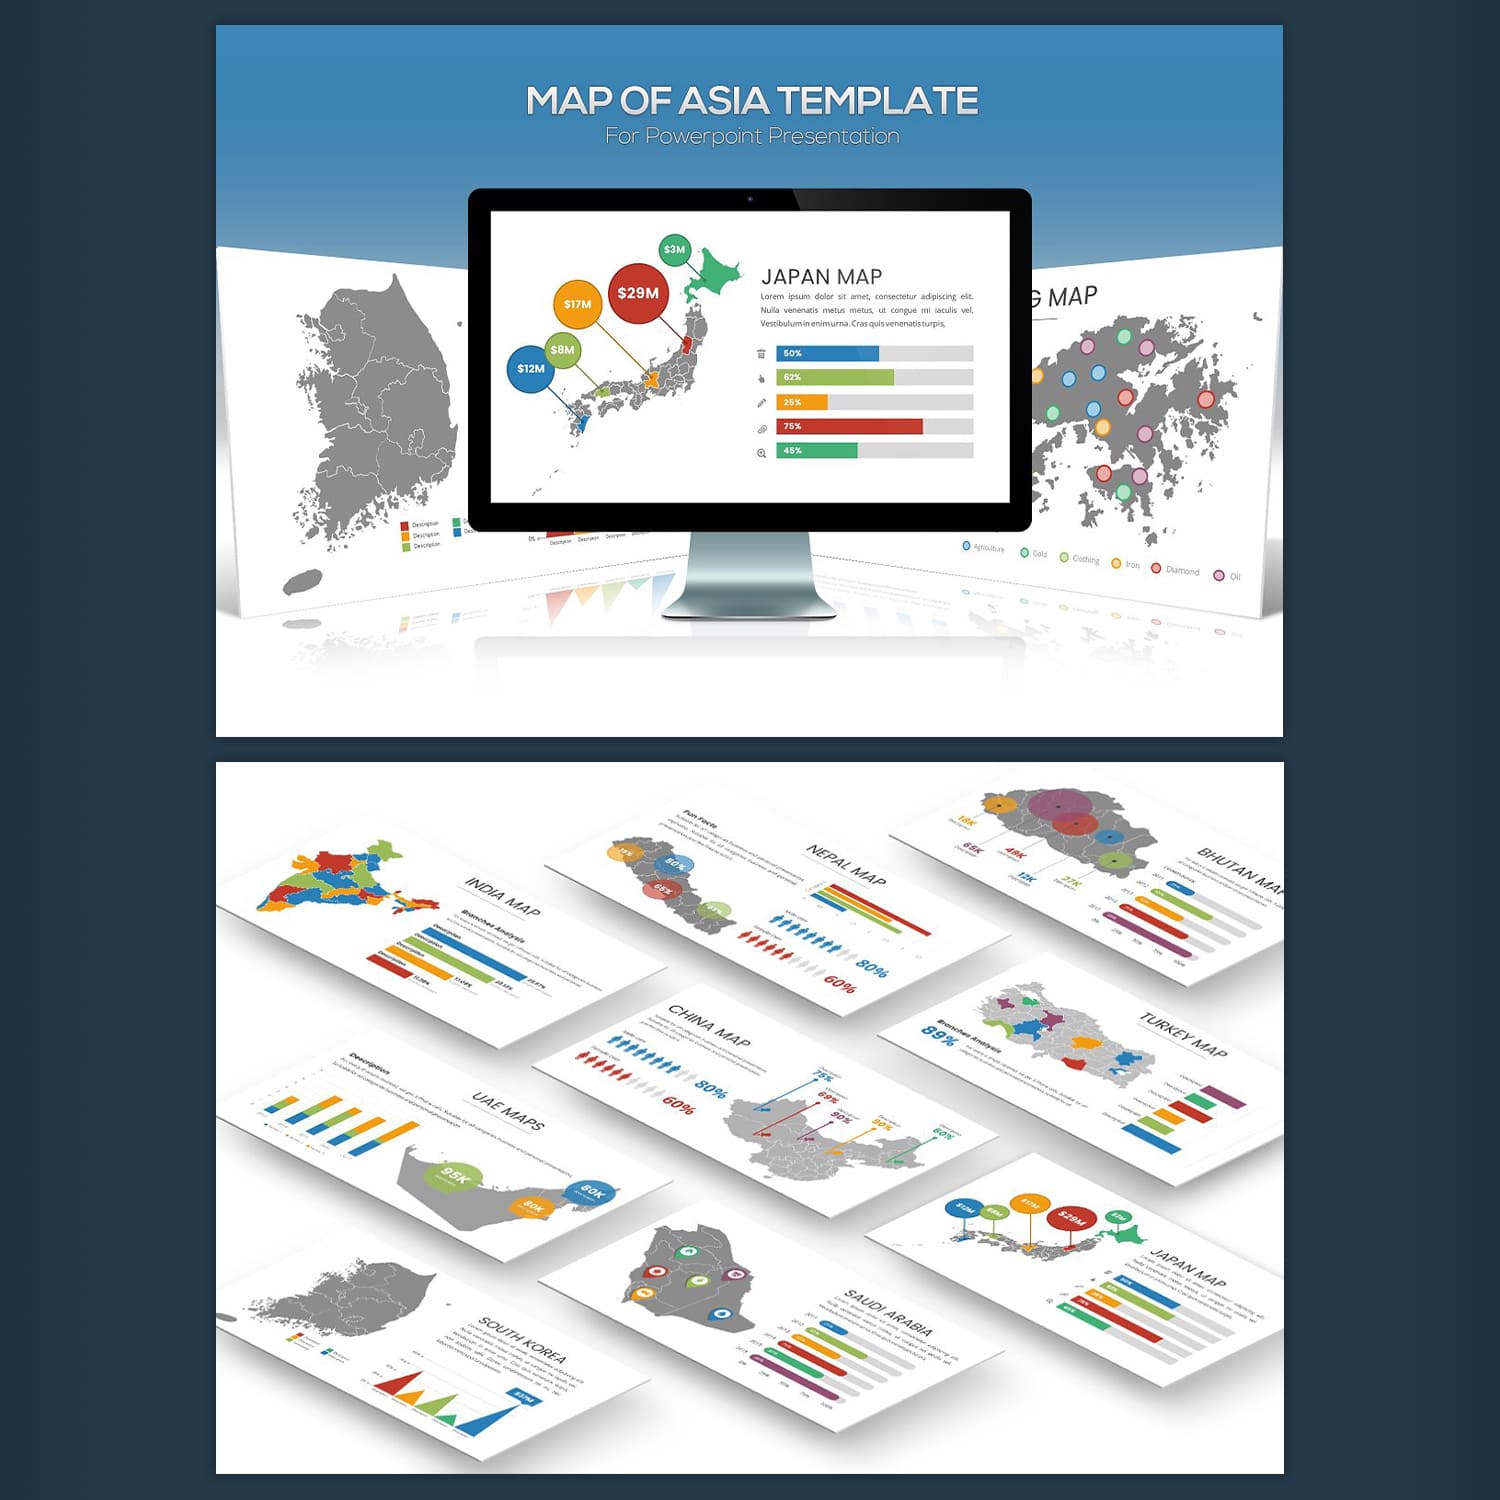 Asia Maps Powerpoint Template cover.